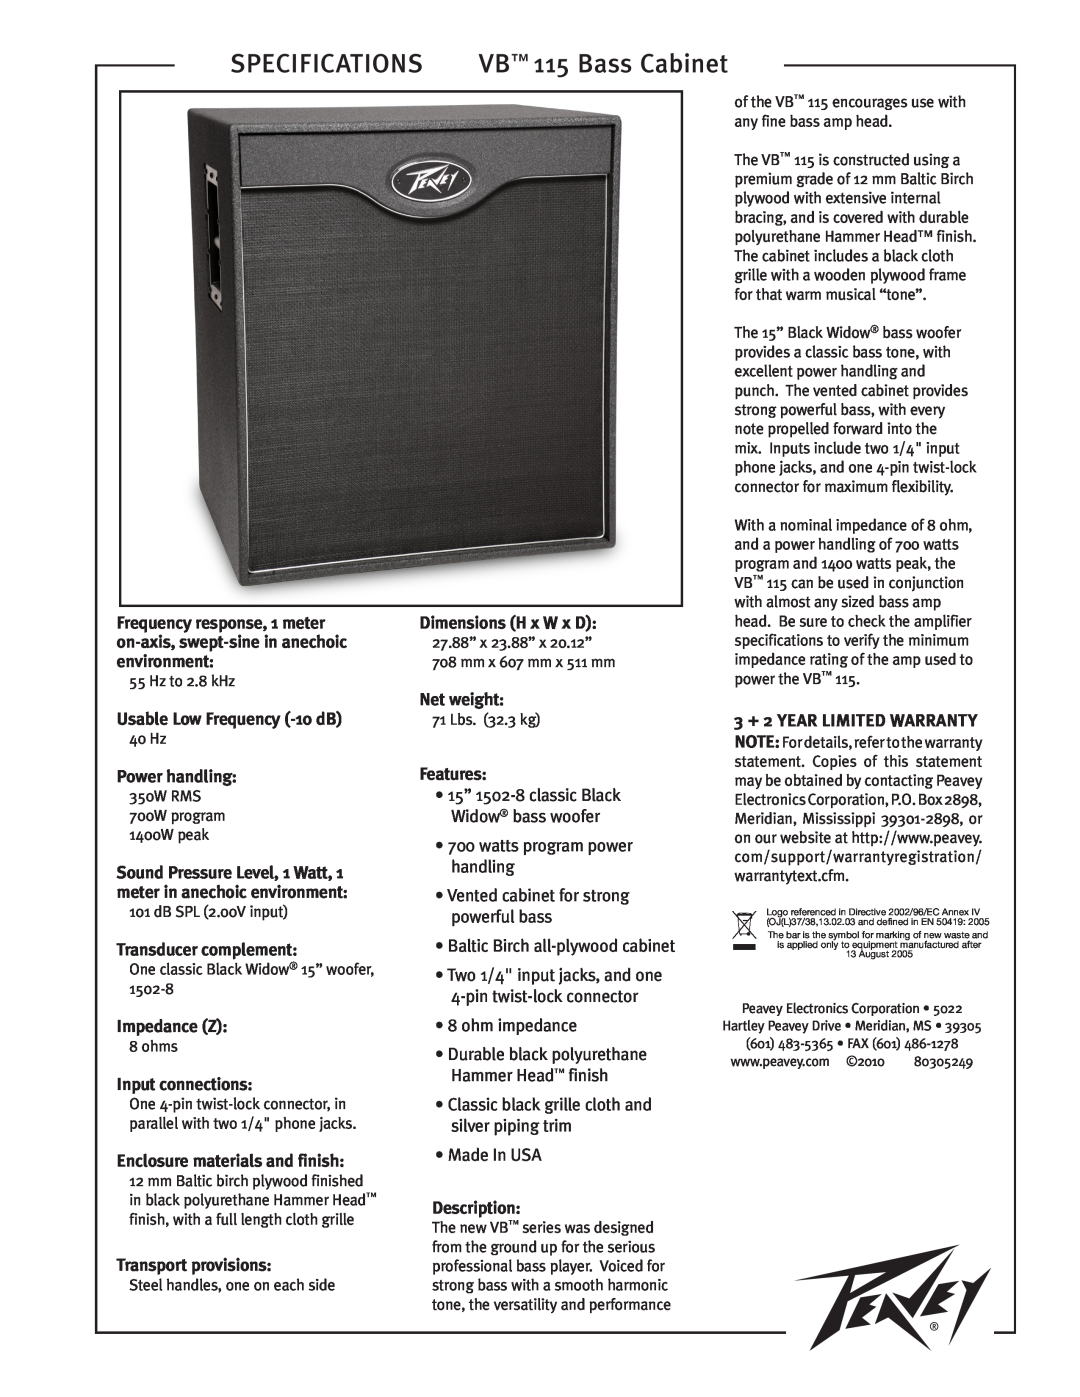 Peavey specifications Specifications, VB 115 Bass Cabinet 